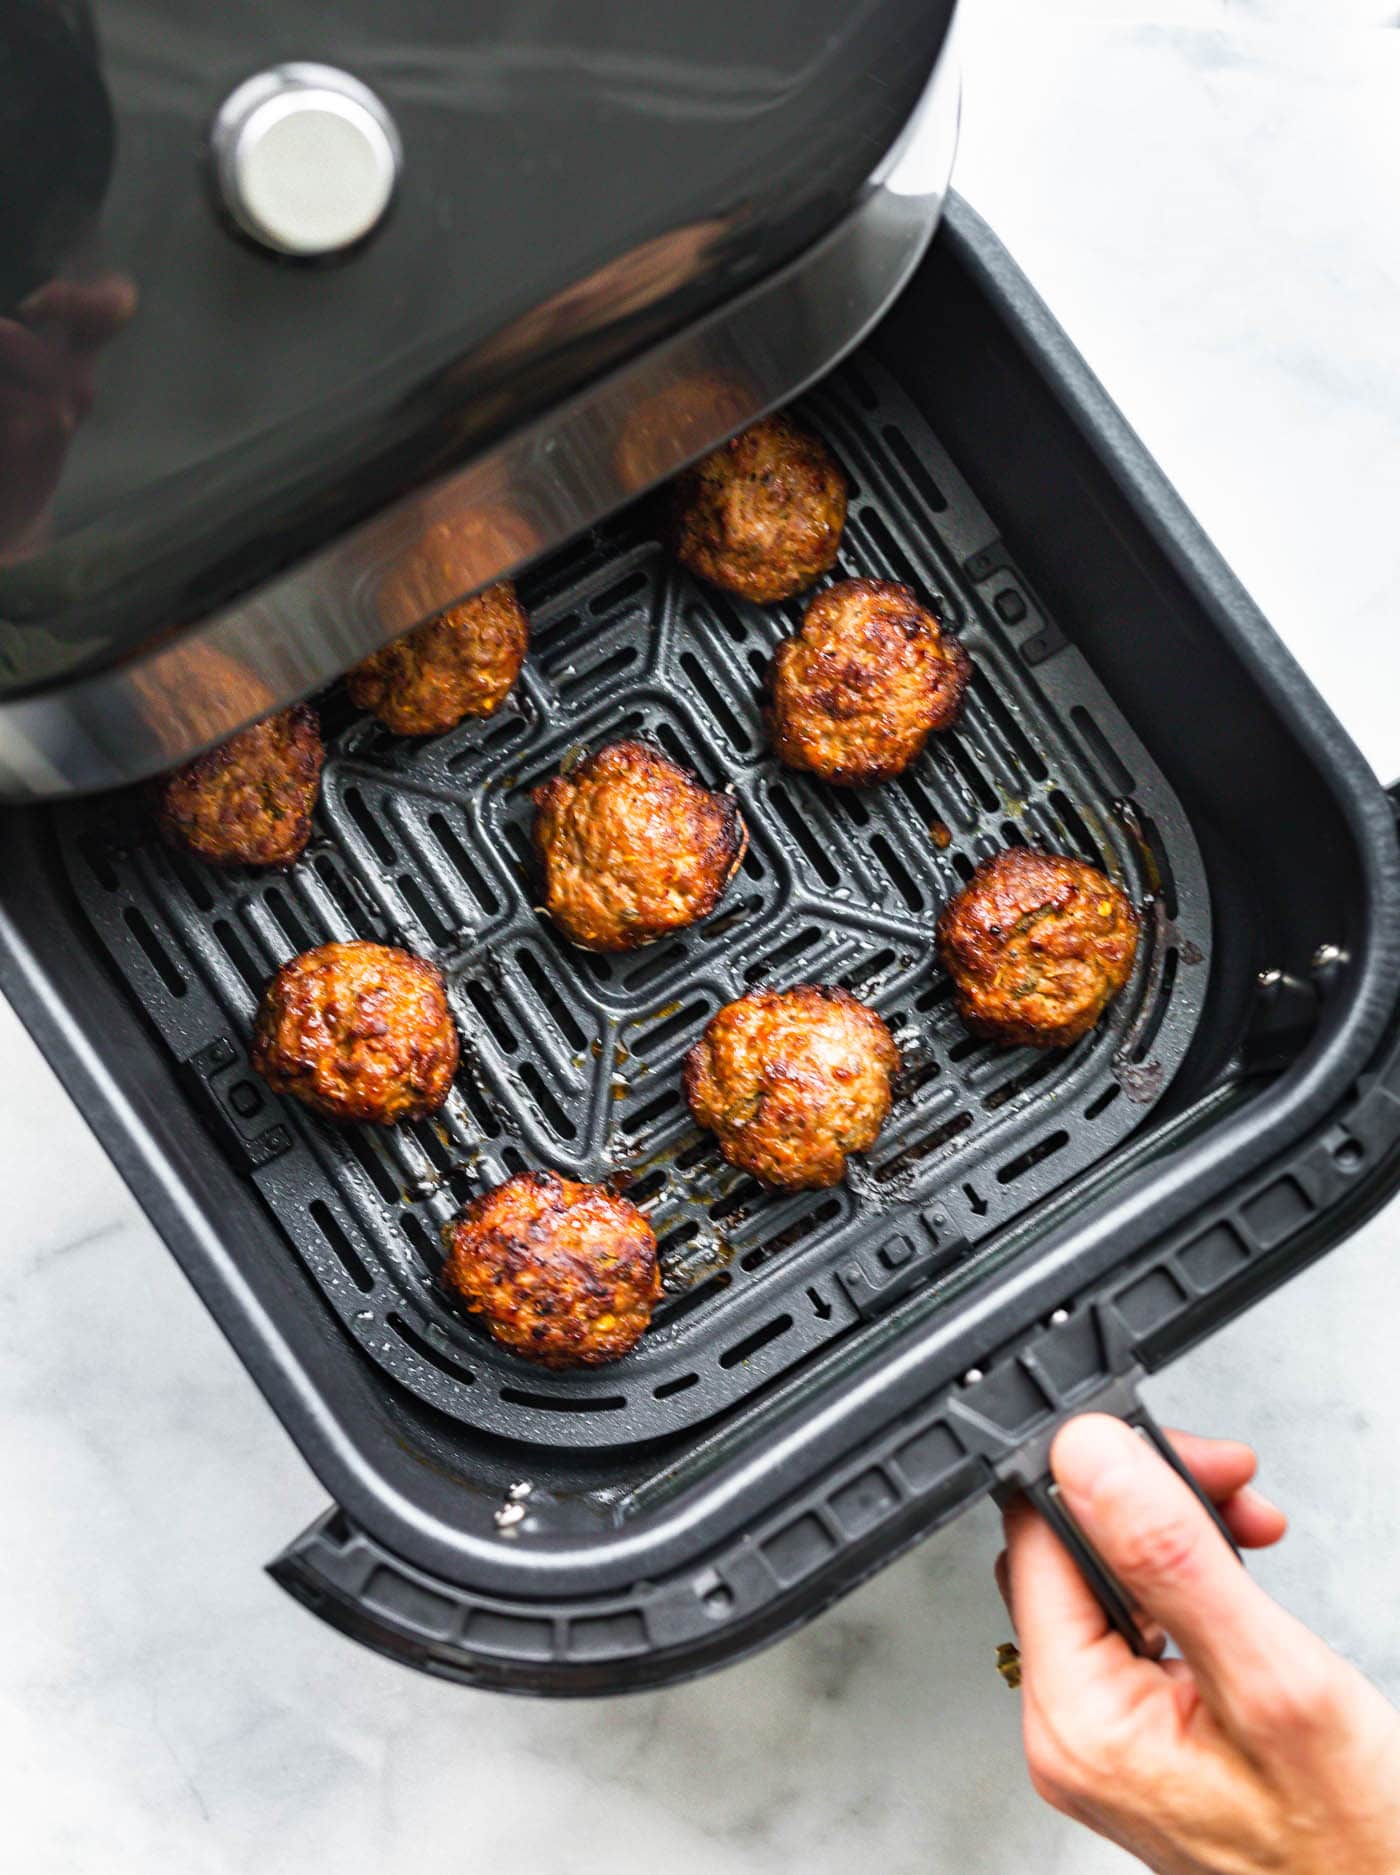 A hand pulling out an air fryer basket with cooked breakfast sausage patties